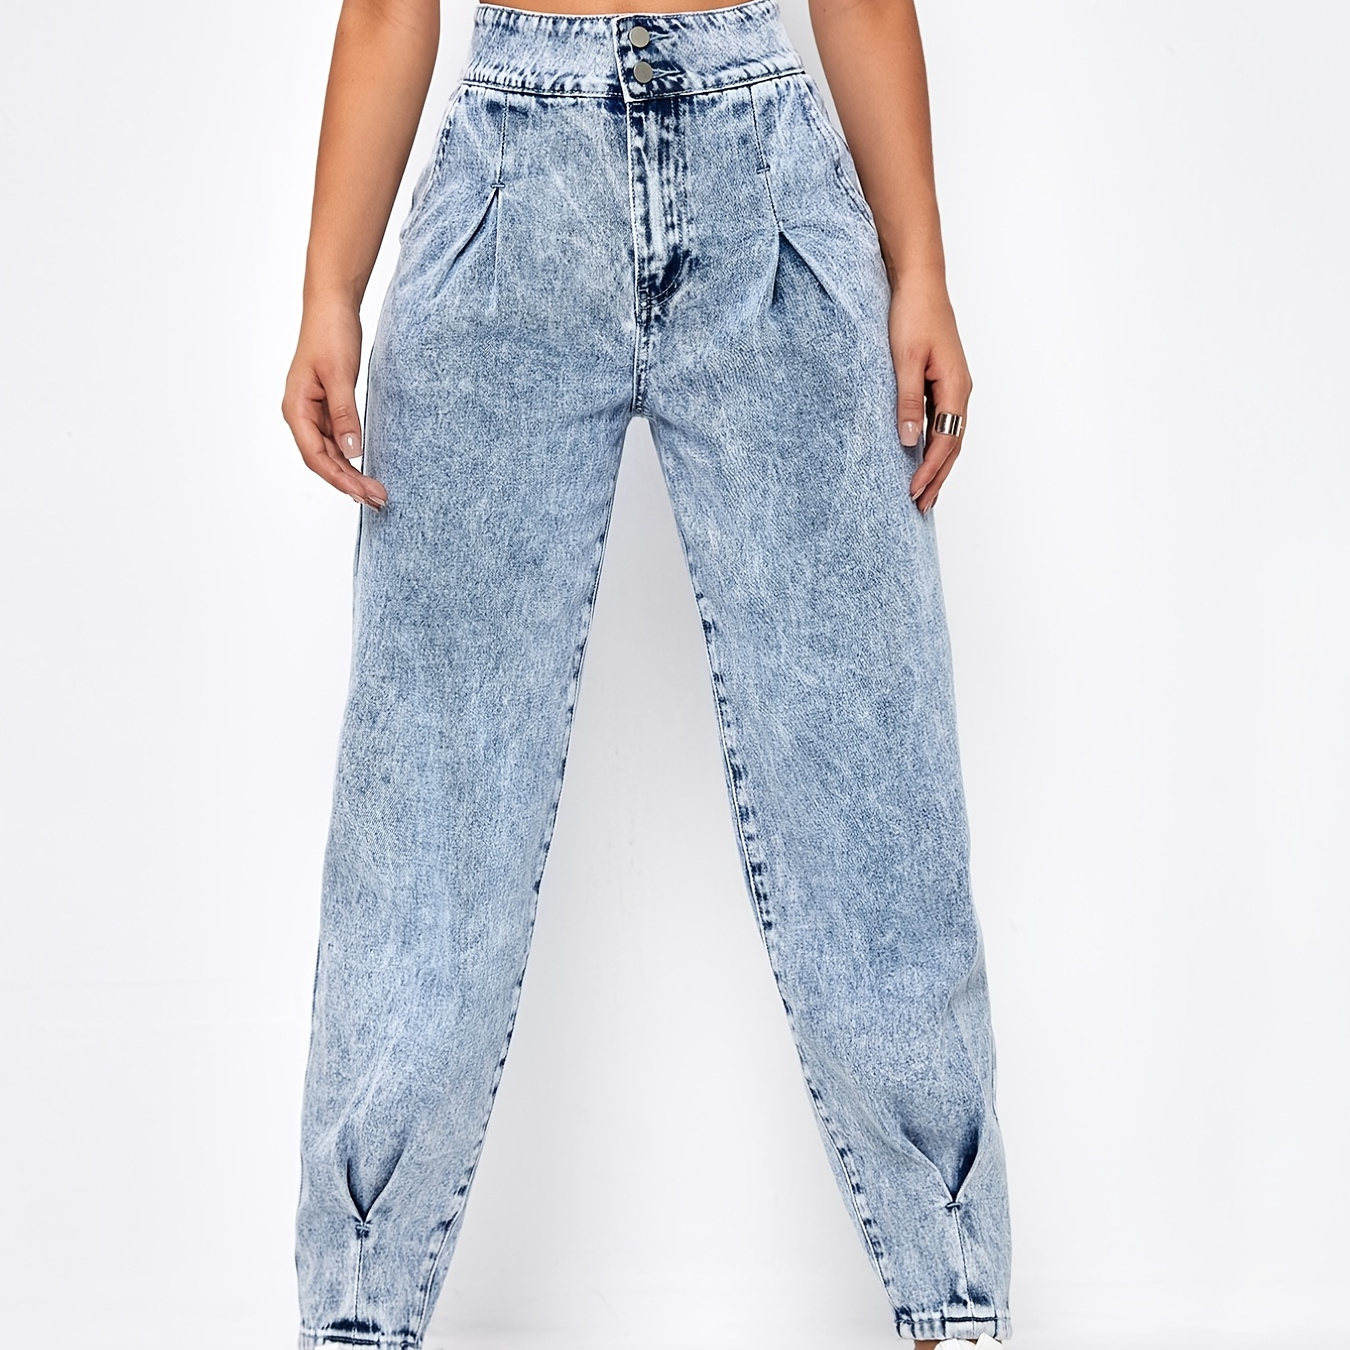 Snowflake Fabrics Slim Fit Loose Crotch High Waist High * Solid Color  Cropped Mom Jeans, Women's Denim Jeans